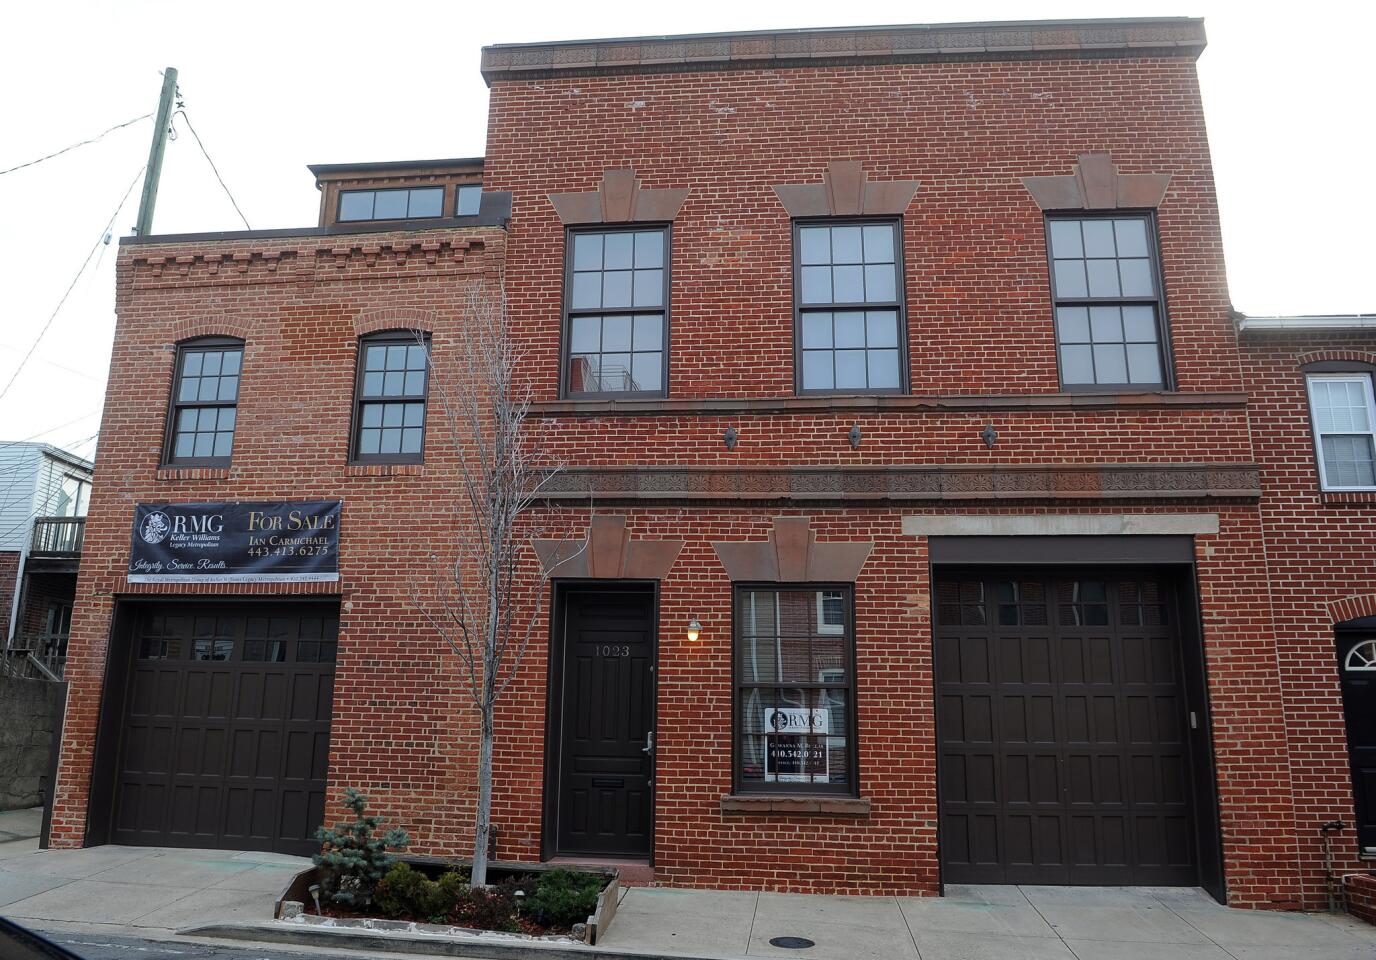 This Canton home, purportedly owned by Olympian Michael Phelps, is on the market for $1.15 million. The two-leveled 2,800 square-foot townhome has a five-car garage, a hot tub and a rooftop terrace.